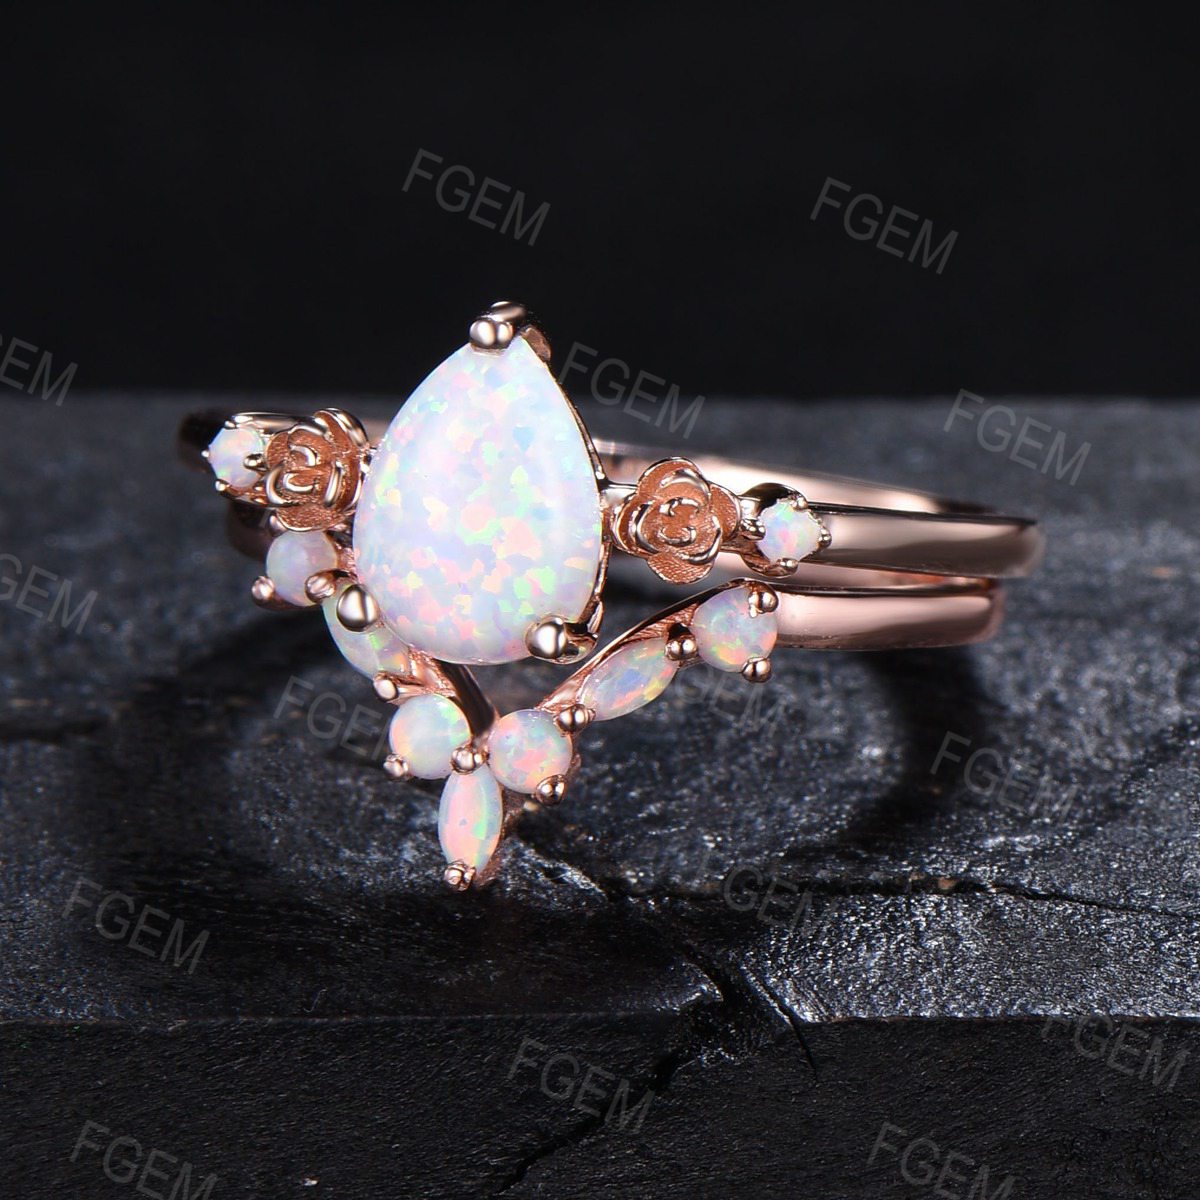 October Birthstone Engagement Ring Set 1.25ct Pear Shaped Nature Inspired Twist White Opal Bridal Set Marquise Natural Amethyst Wedding Ring (Copy)